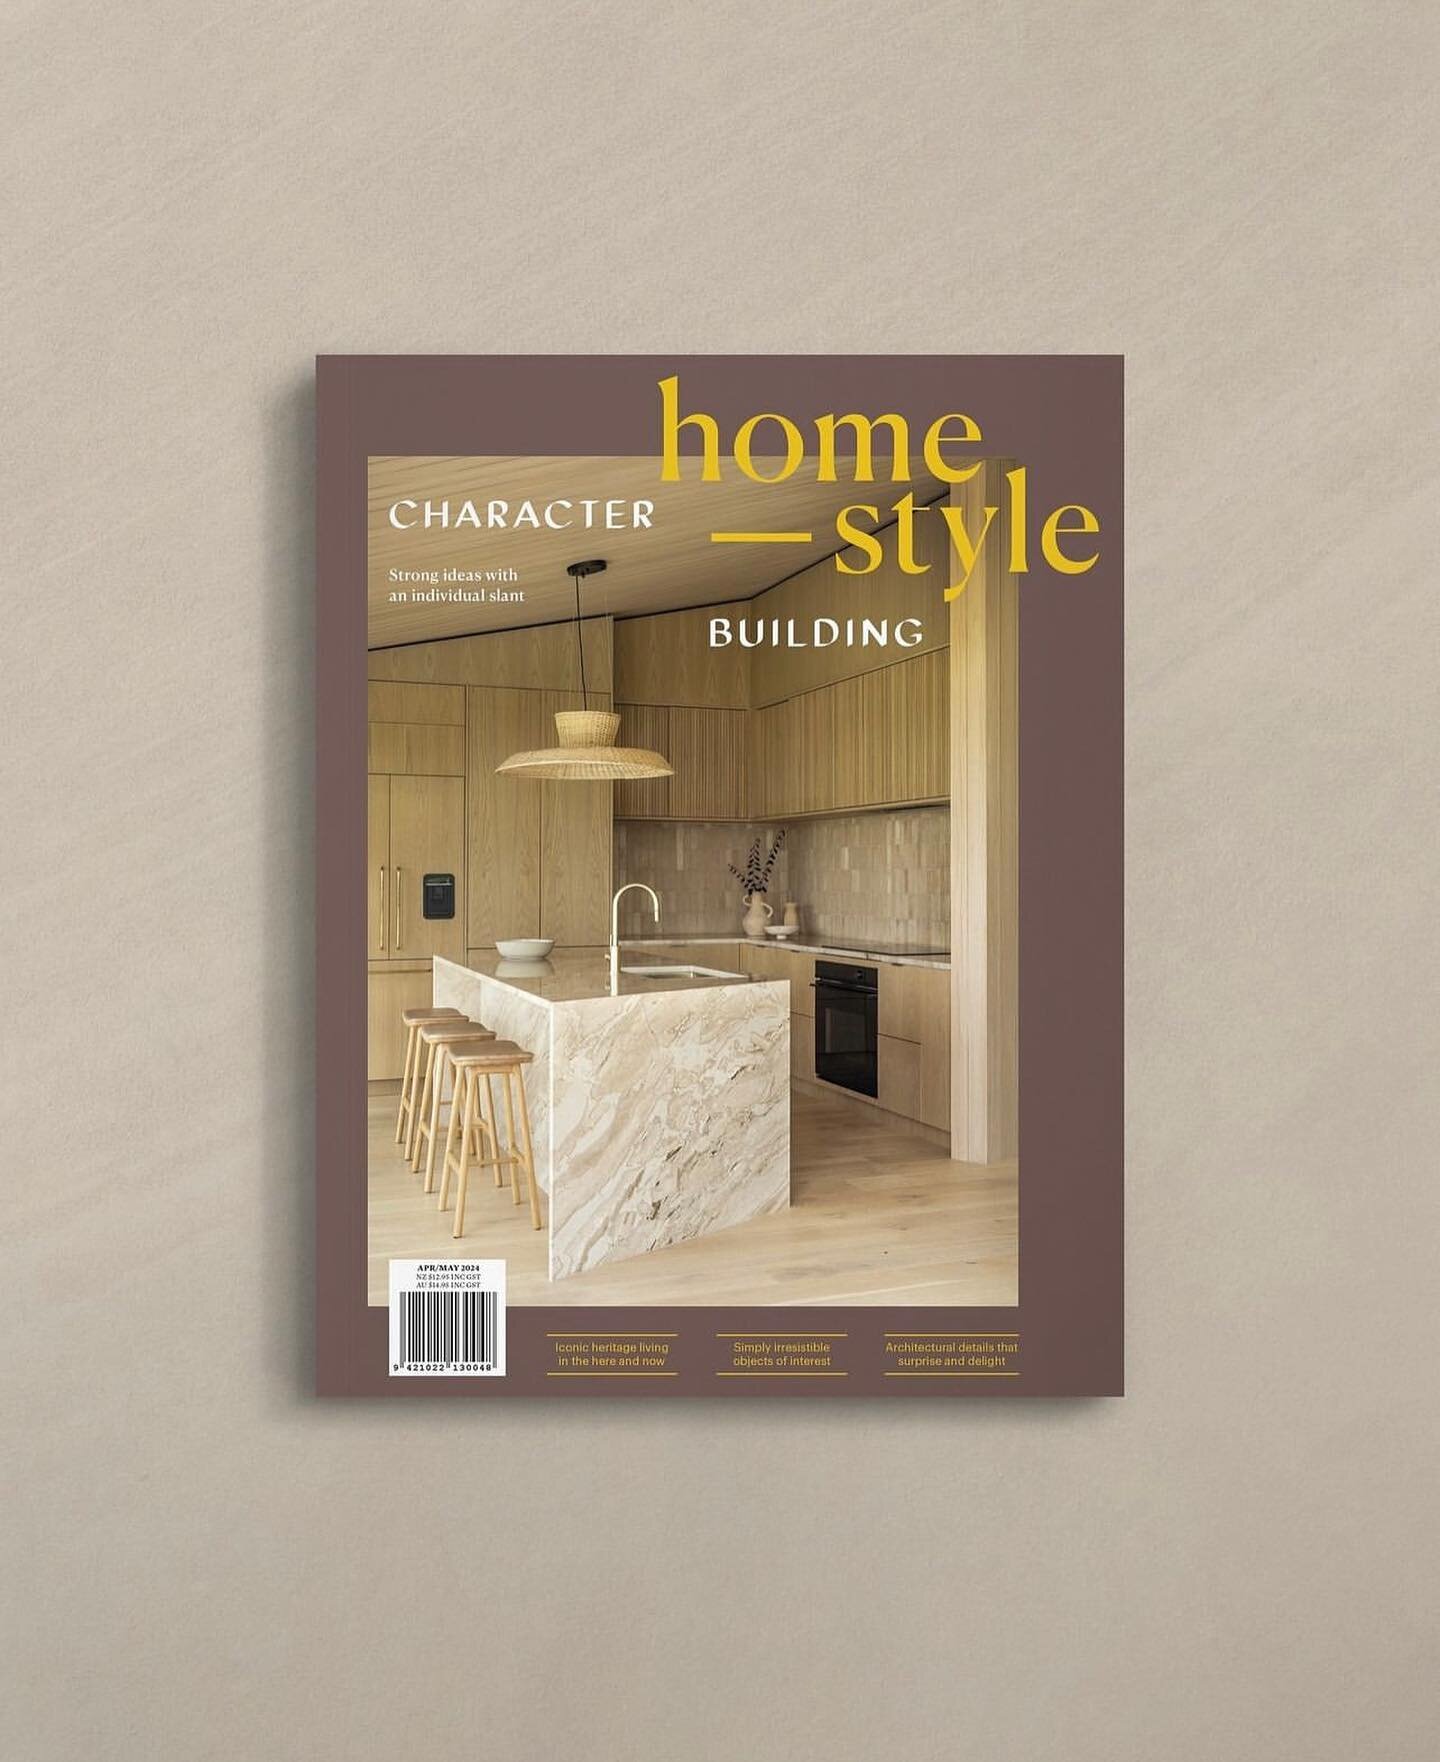 Feeling very grateful to land this cover with @homestylemag and shot by the one and only @david_._straight 

Get yourself a copy next time your in the store and let us know what you think!

@crossonarchitects 
@chris_bell_construction 
@stylesjoinery